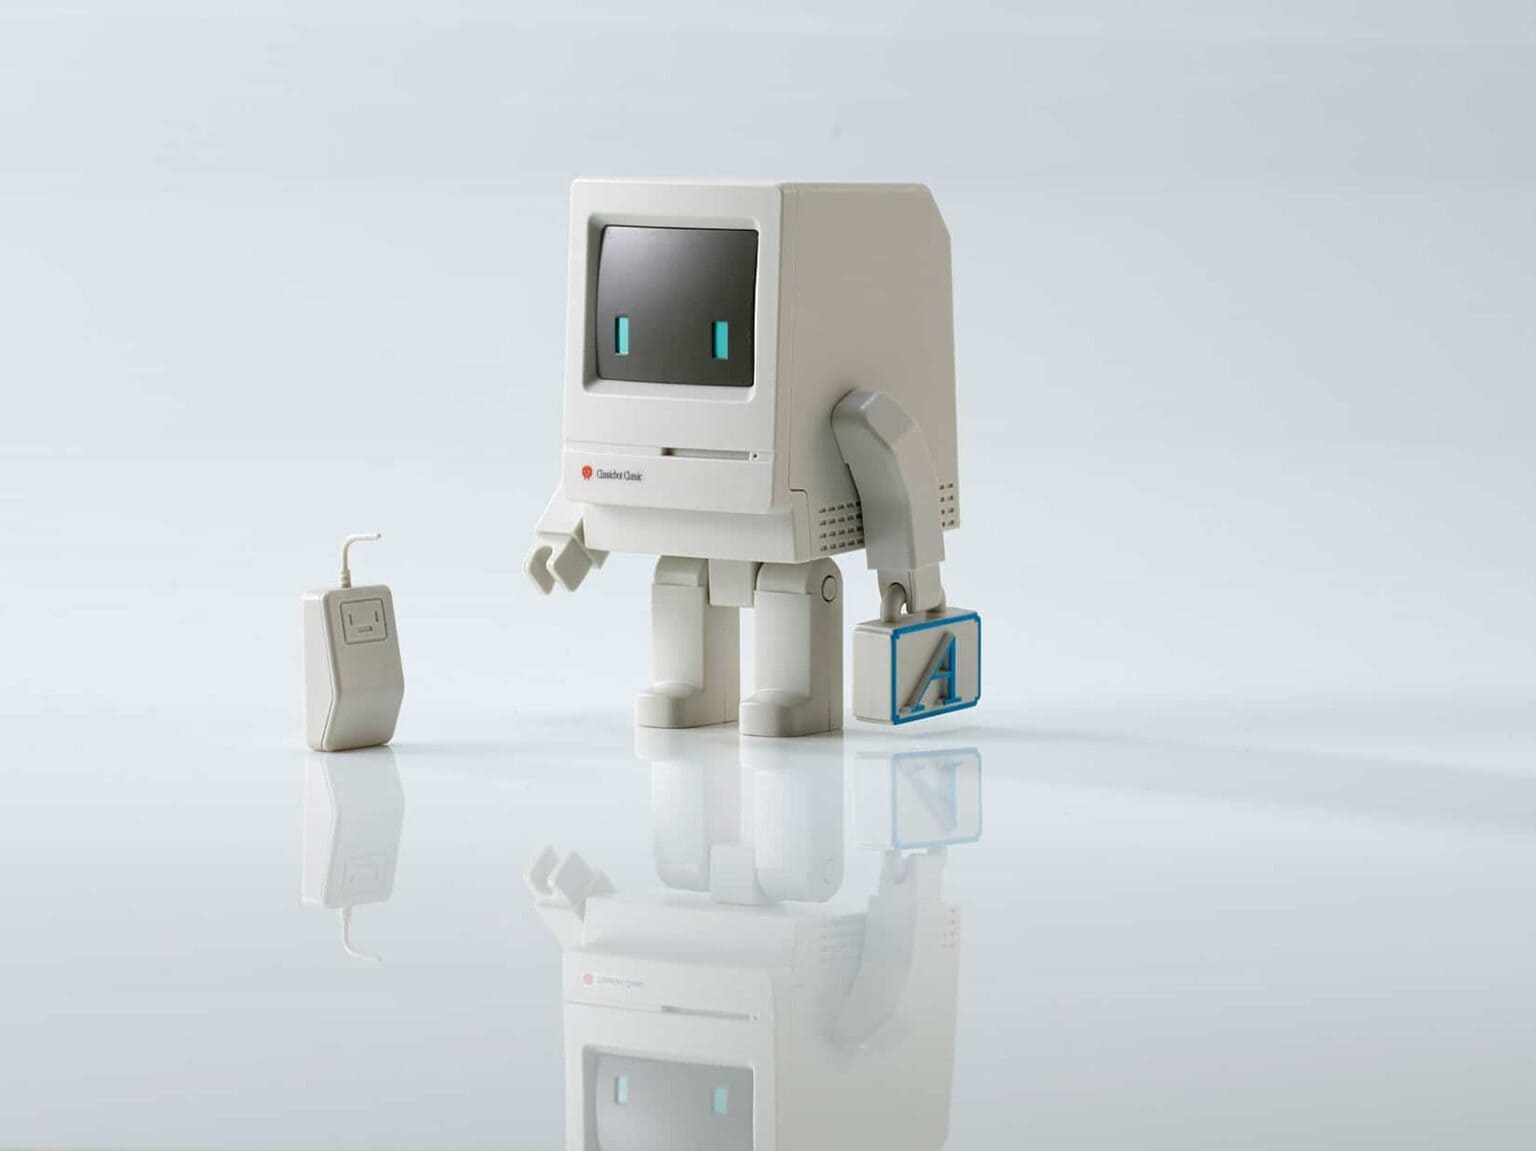 Apple home robotic devices surely won't look like this Classicbot toy, which looks like a vintage Macintosh computer with arms and legs.